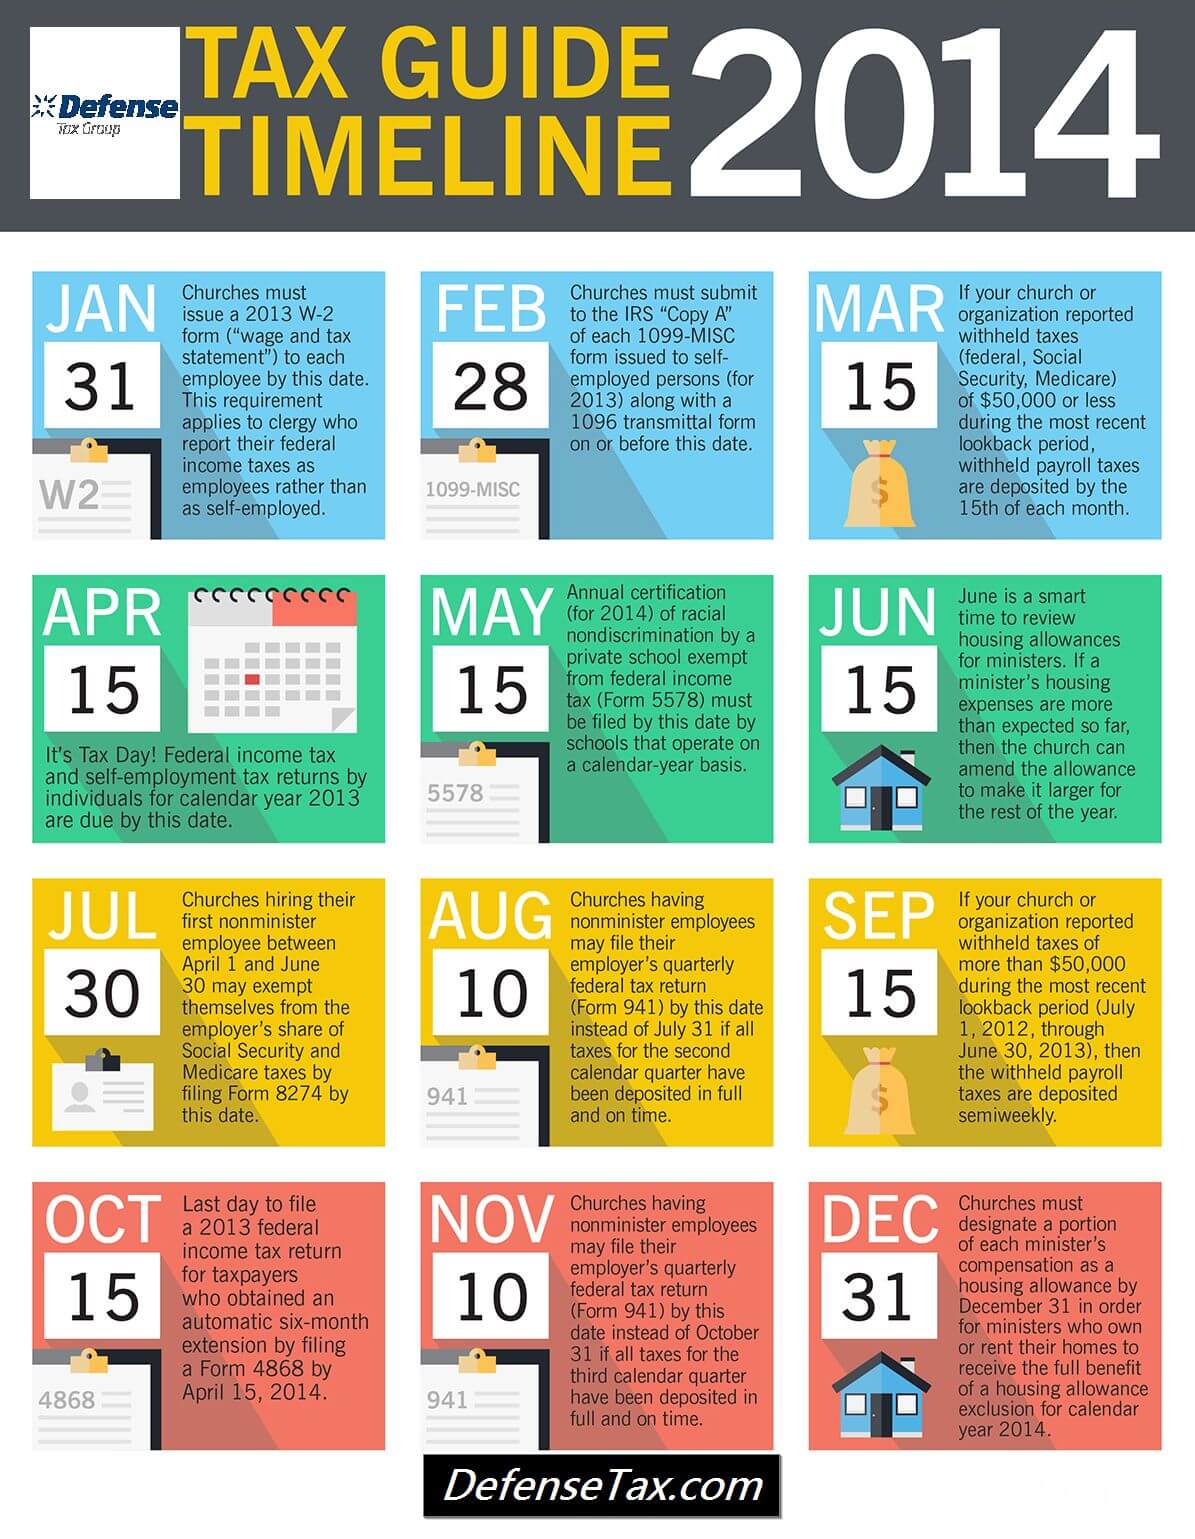 Defensetax.com -  Tax Guide Timeline 2014 Infographic - Critical Dates, Deadlines, and Reminders 